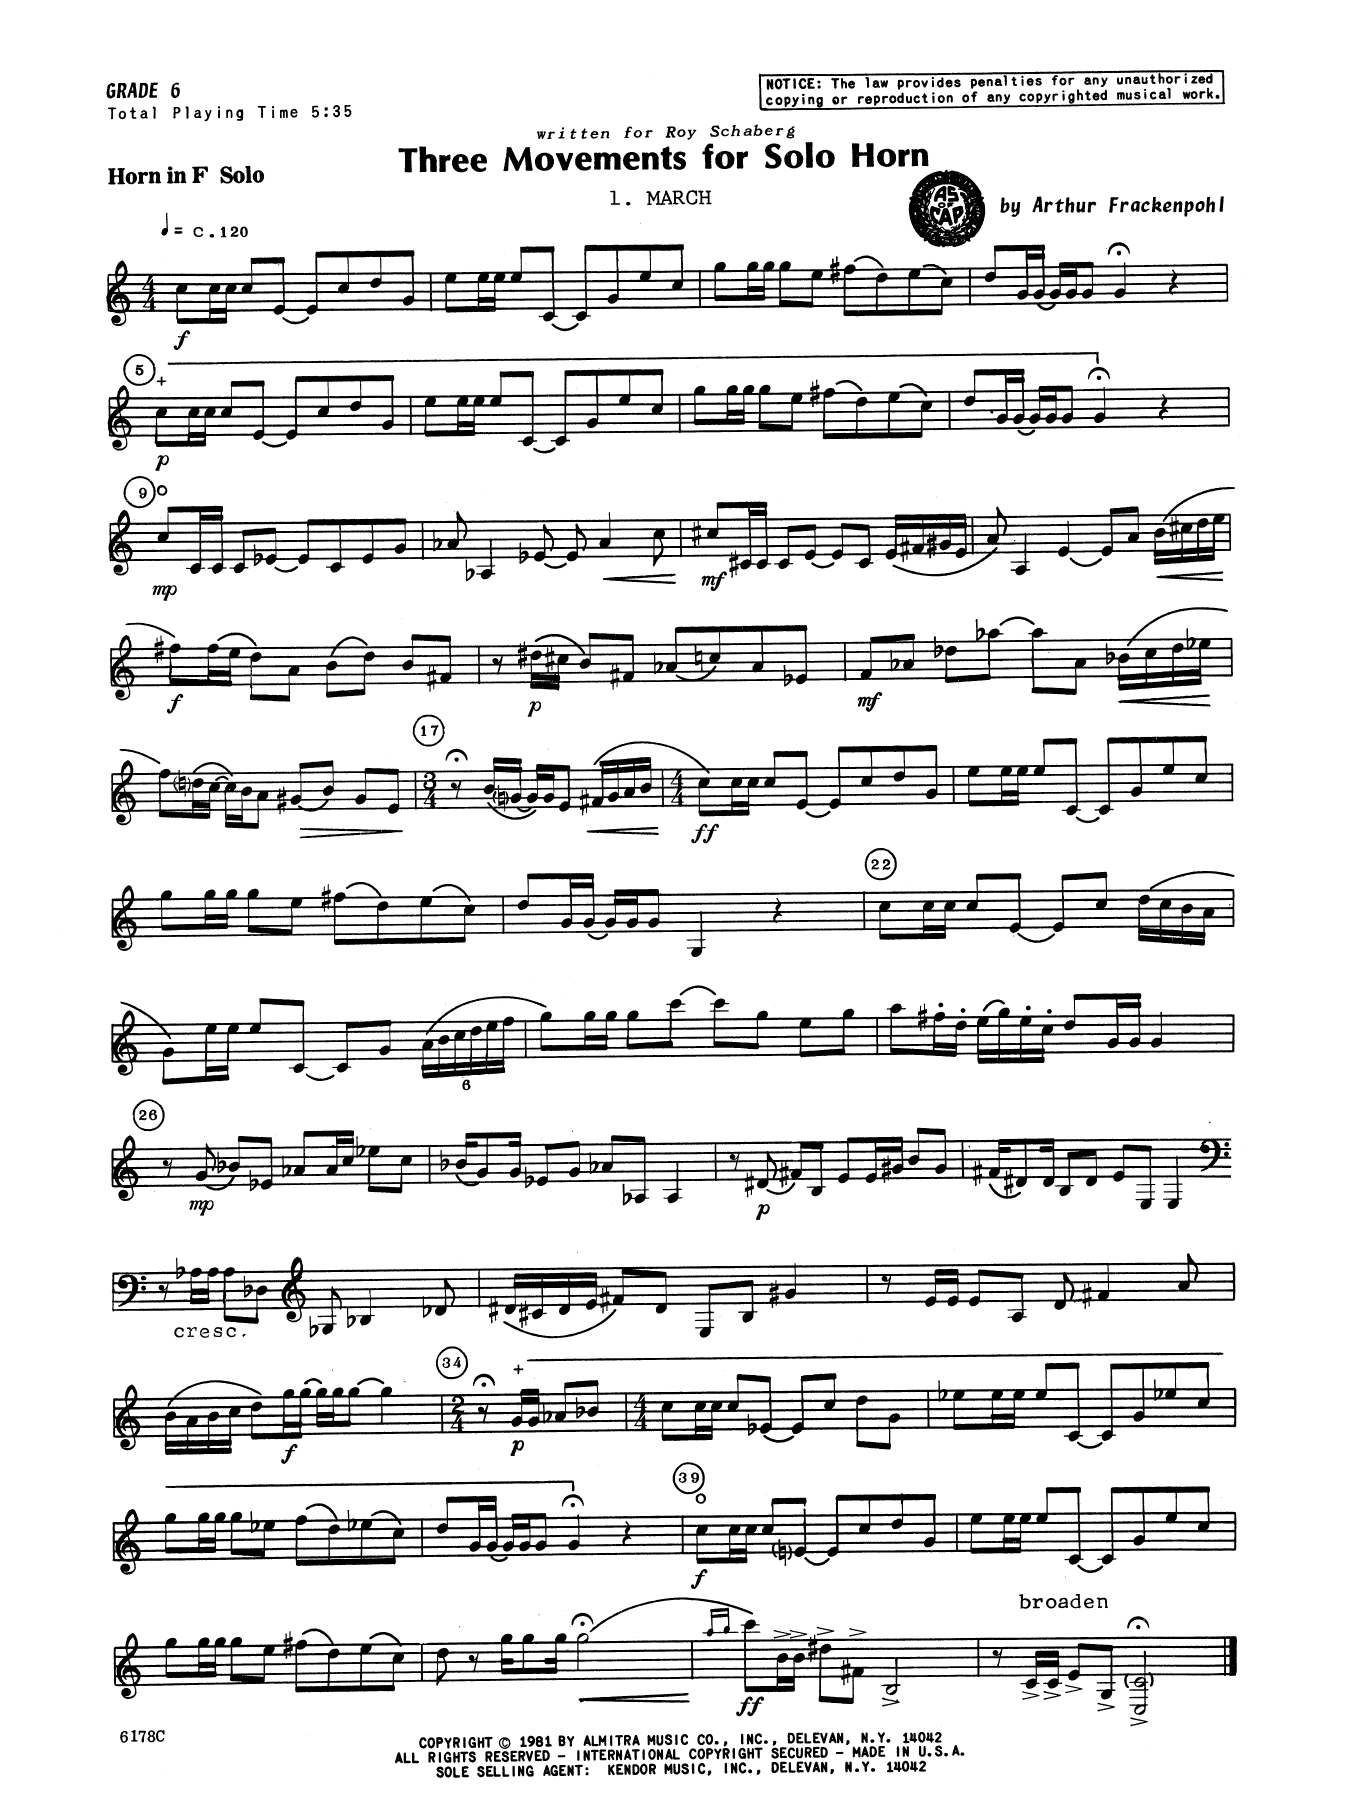 Three Movements For Solo Horn sheet music